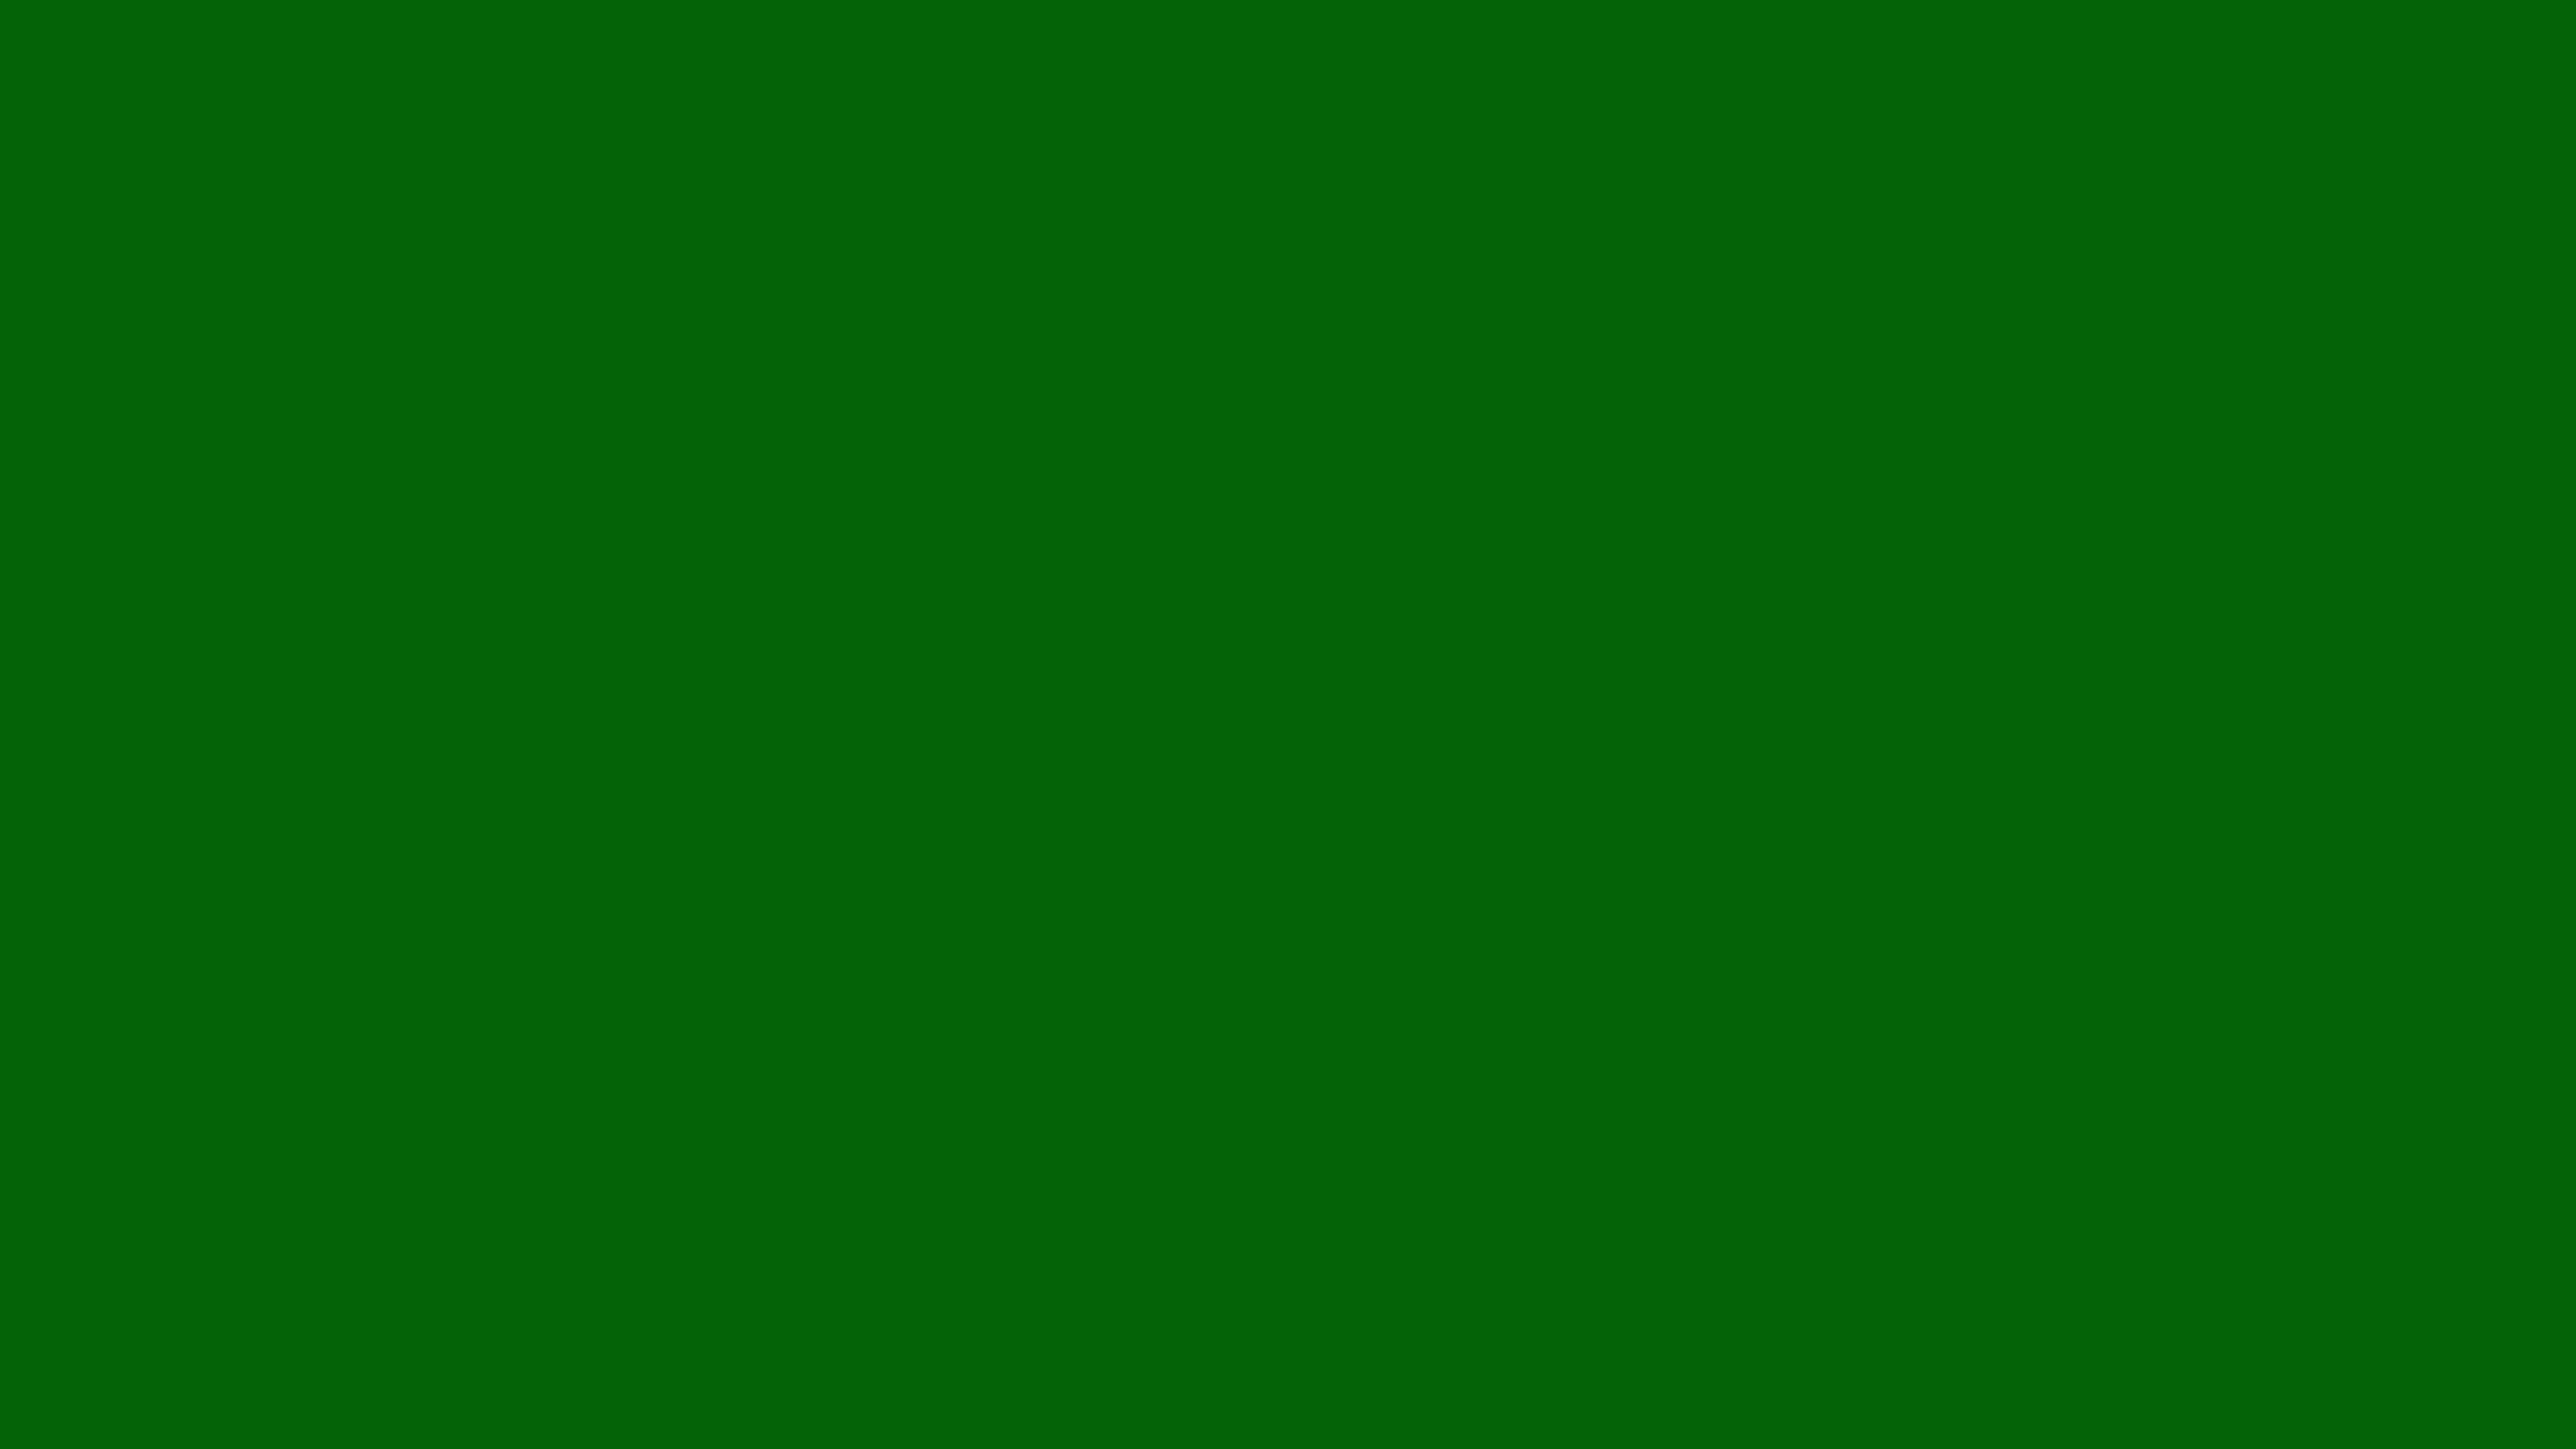 Complementary Colors To Emerald Green